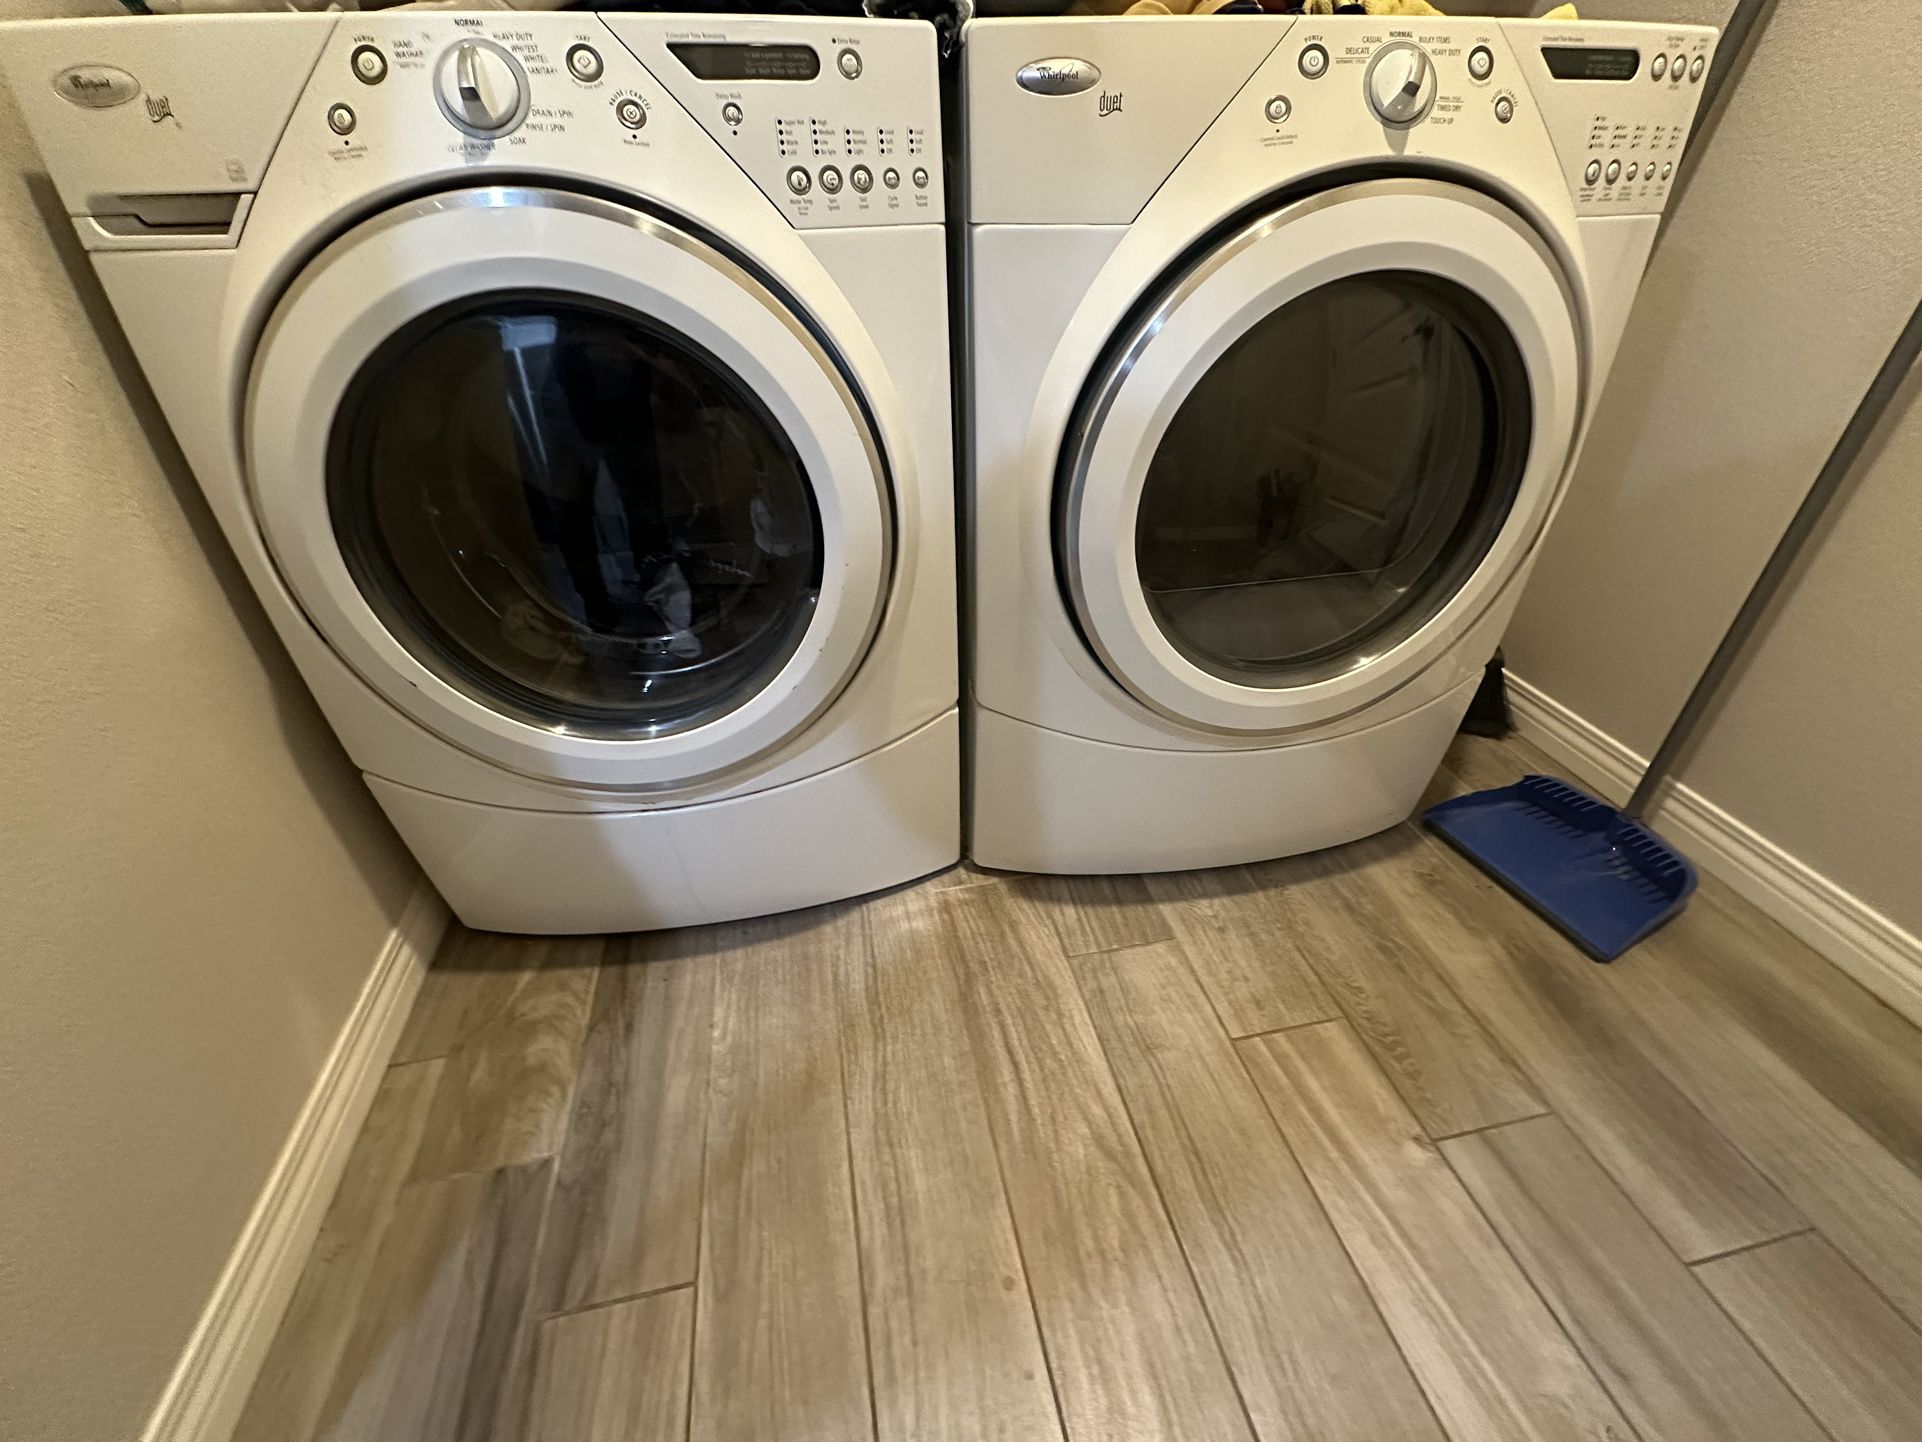 Whirlpool Duet Washer & dryer. Delivered!